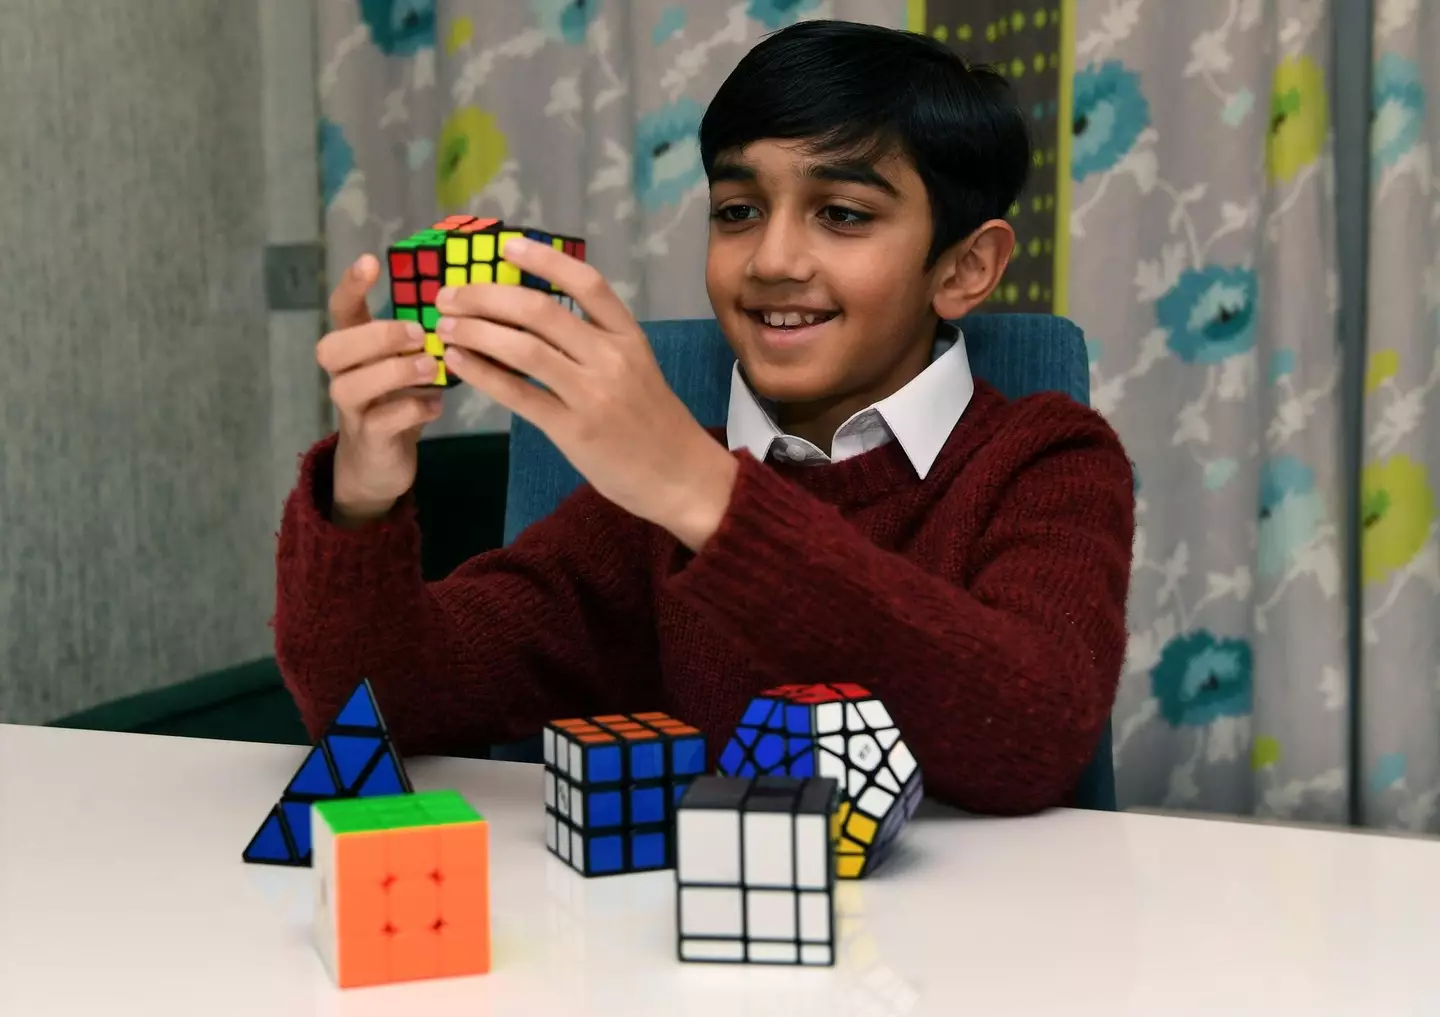 Yusuf Shah, 11, managed to score a whopping 162.